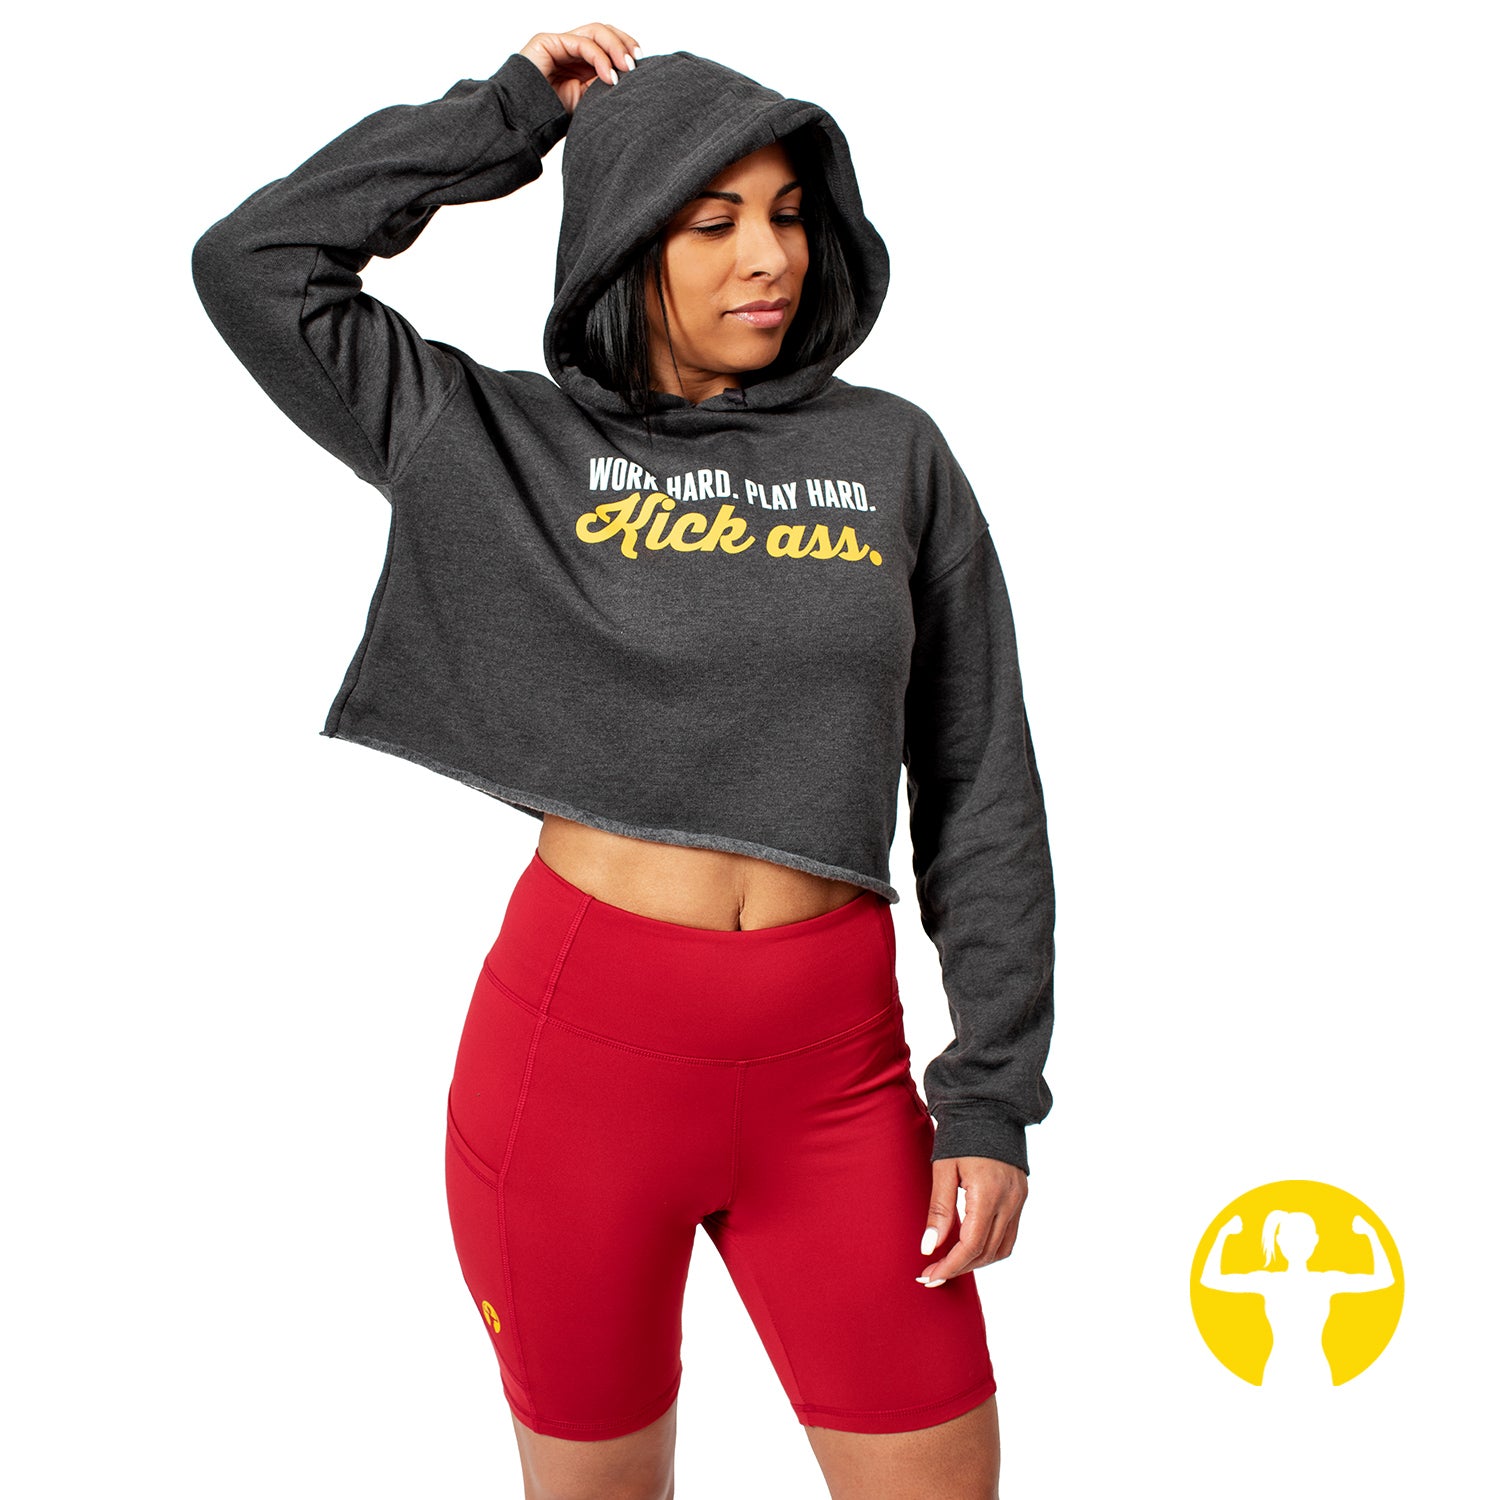 Work hard. Play hard. Kick ass. Cropped fleece hoodie available in grey, green or mauve.